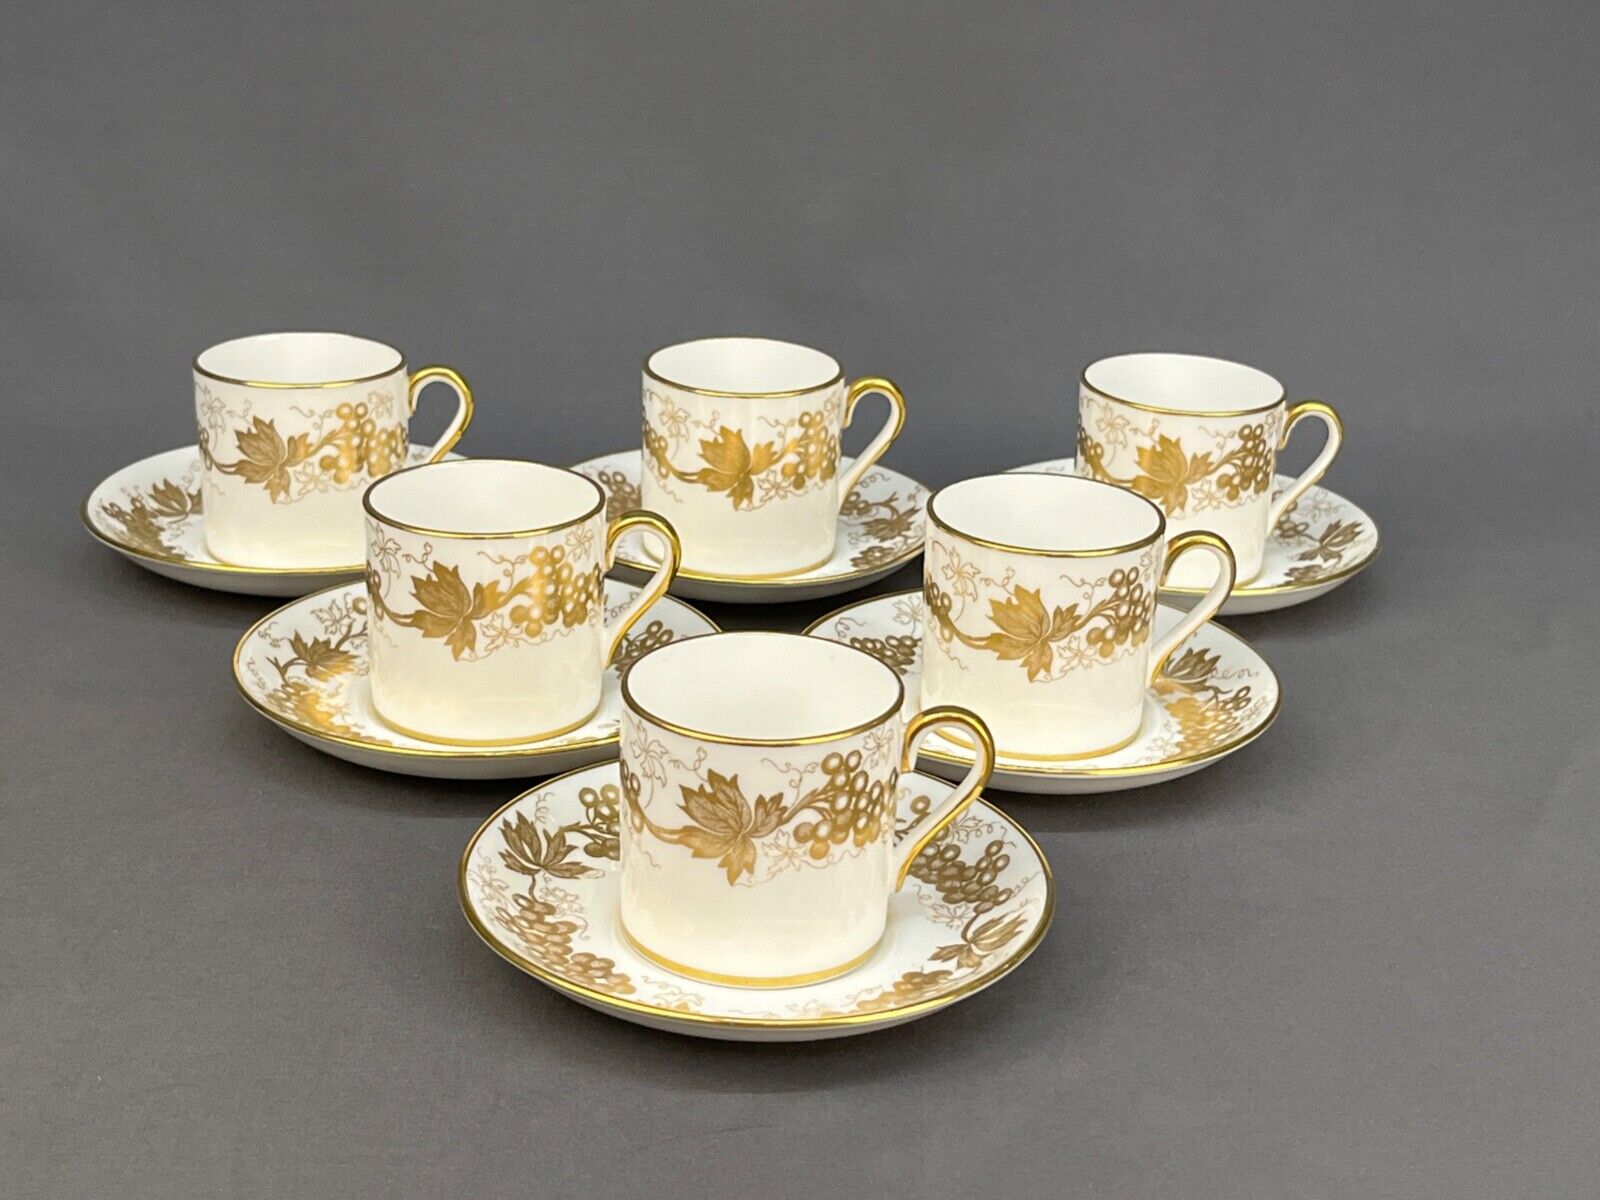 6 Hammersley & Co for Tiffany Demitasse Cup & Saucer Sets Gilt Grapes & Leaves